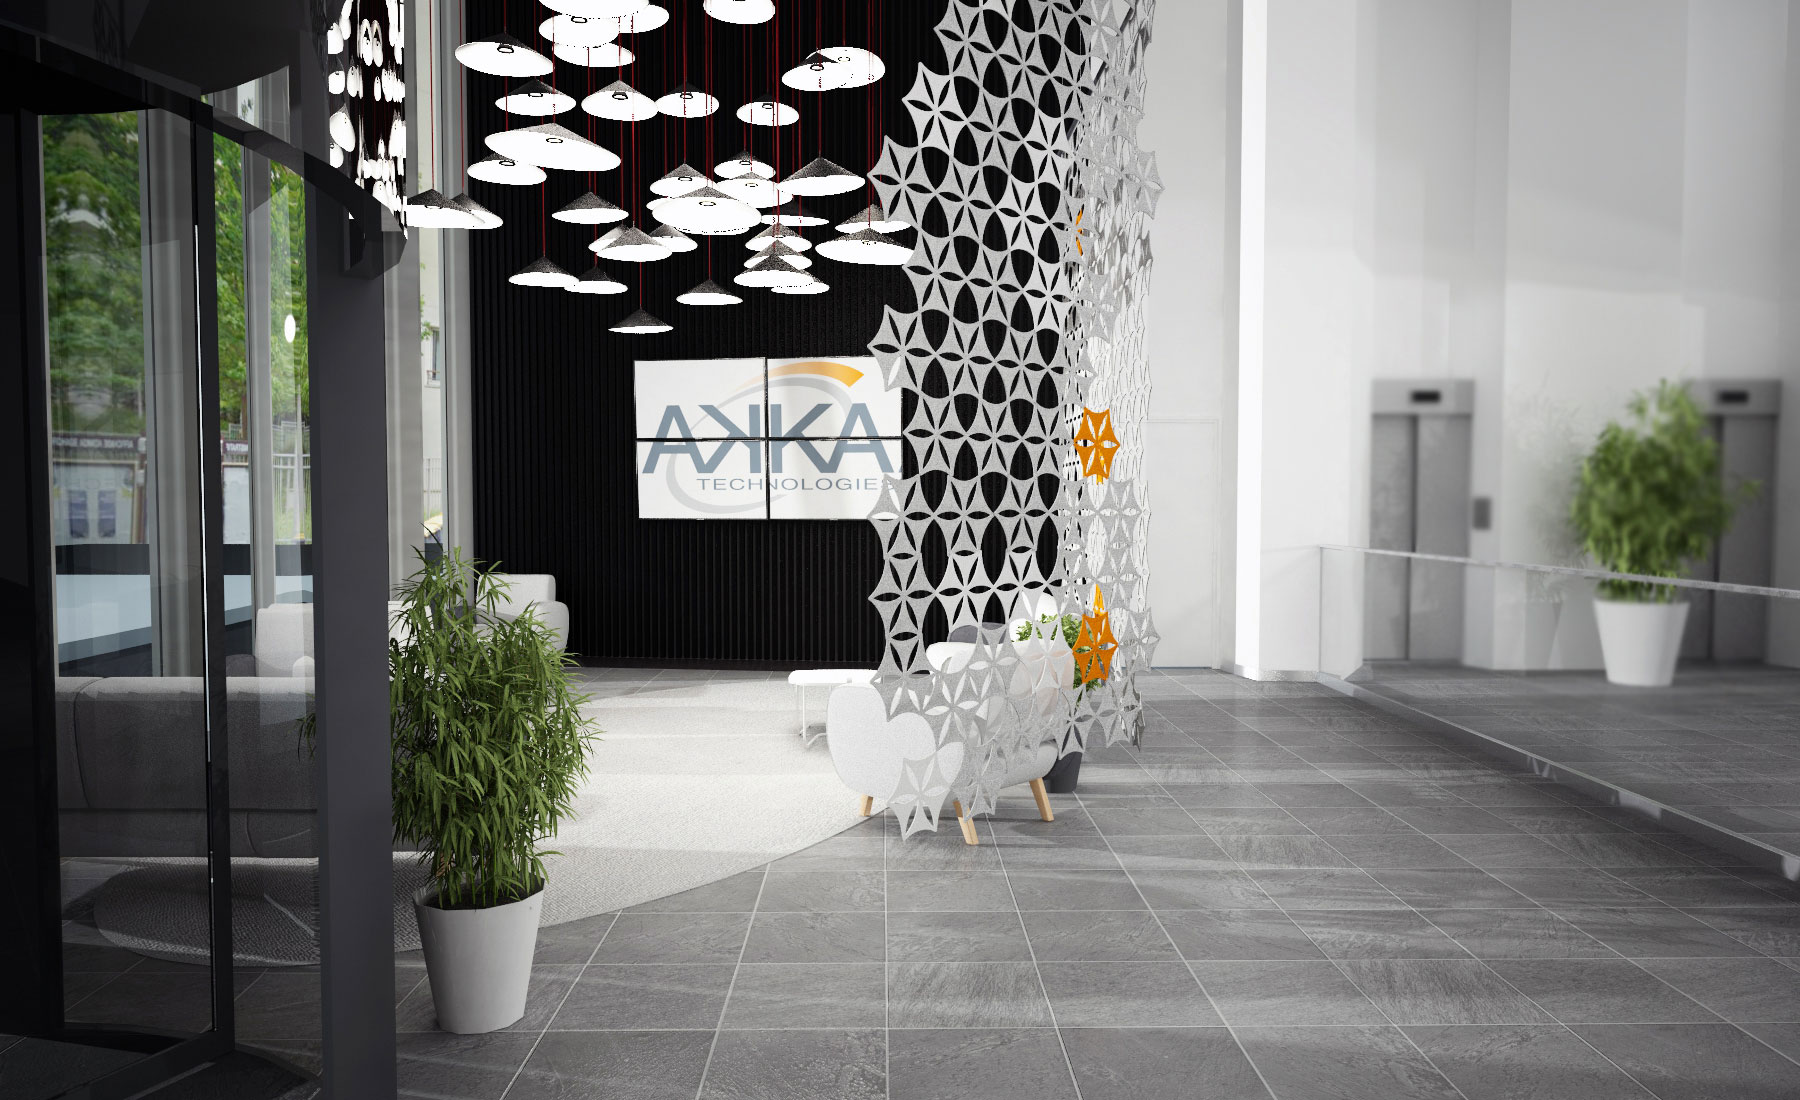 OPEN SPACE – LOBBY & CAFET / Akka Toulouse